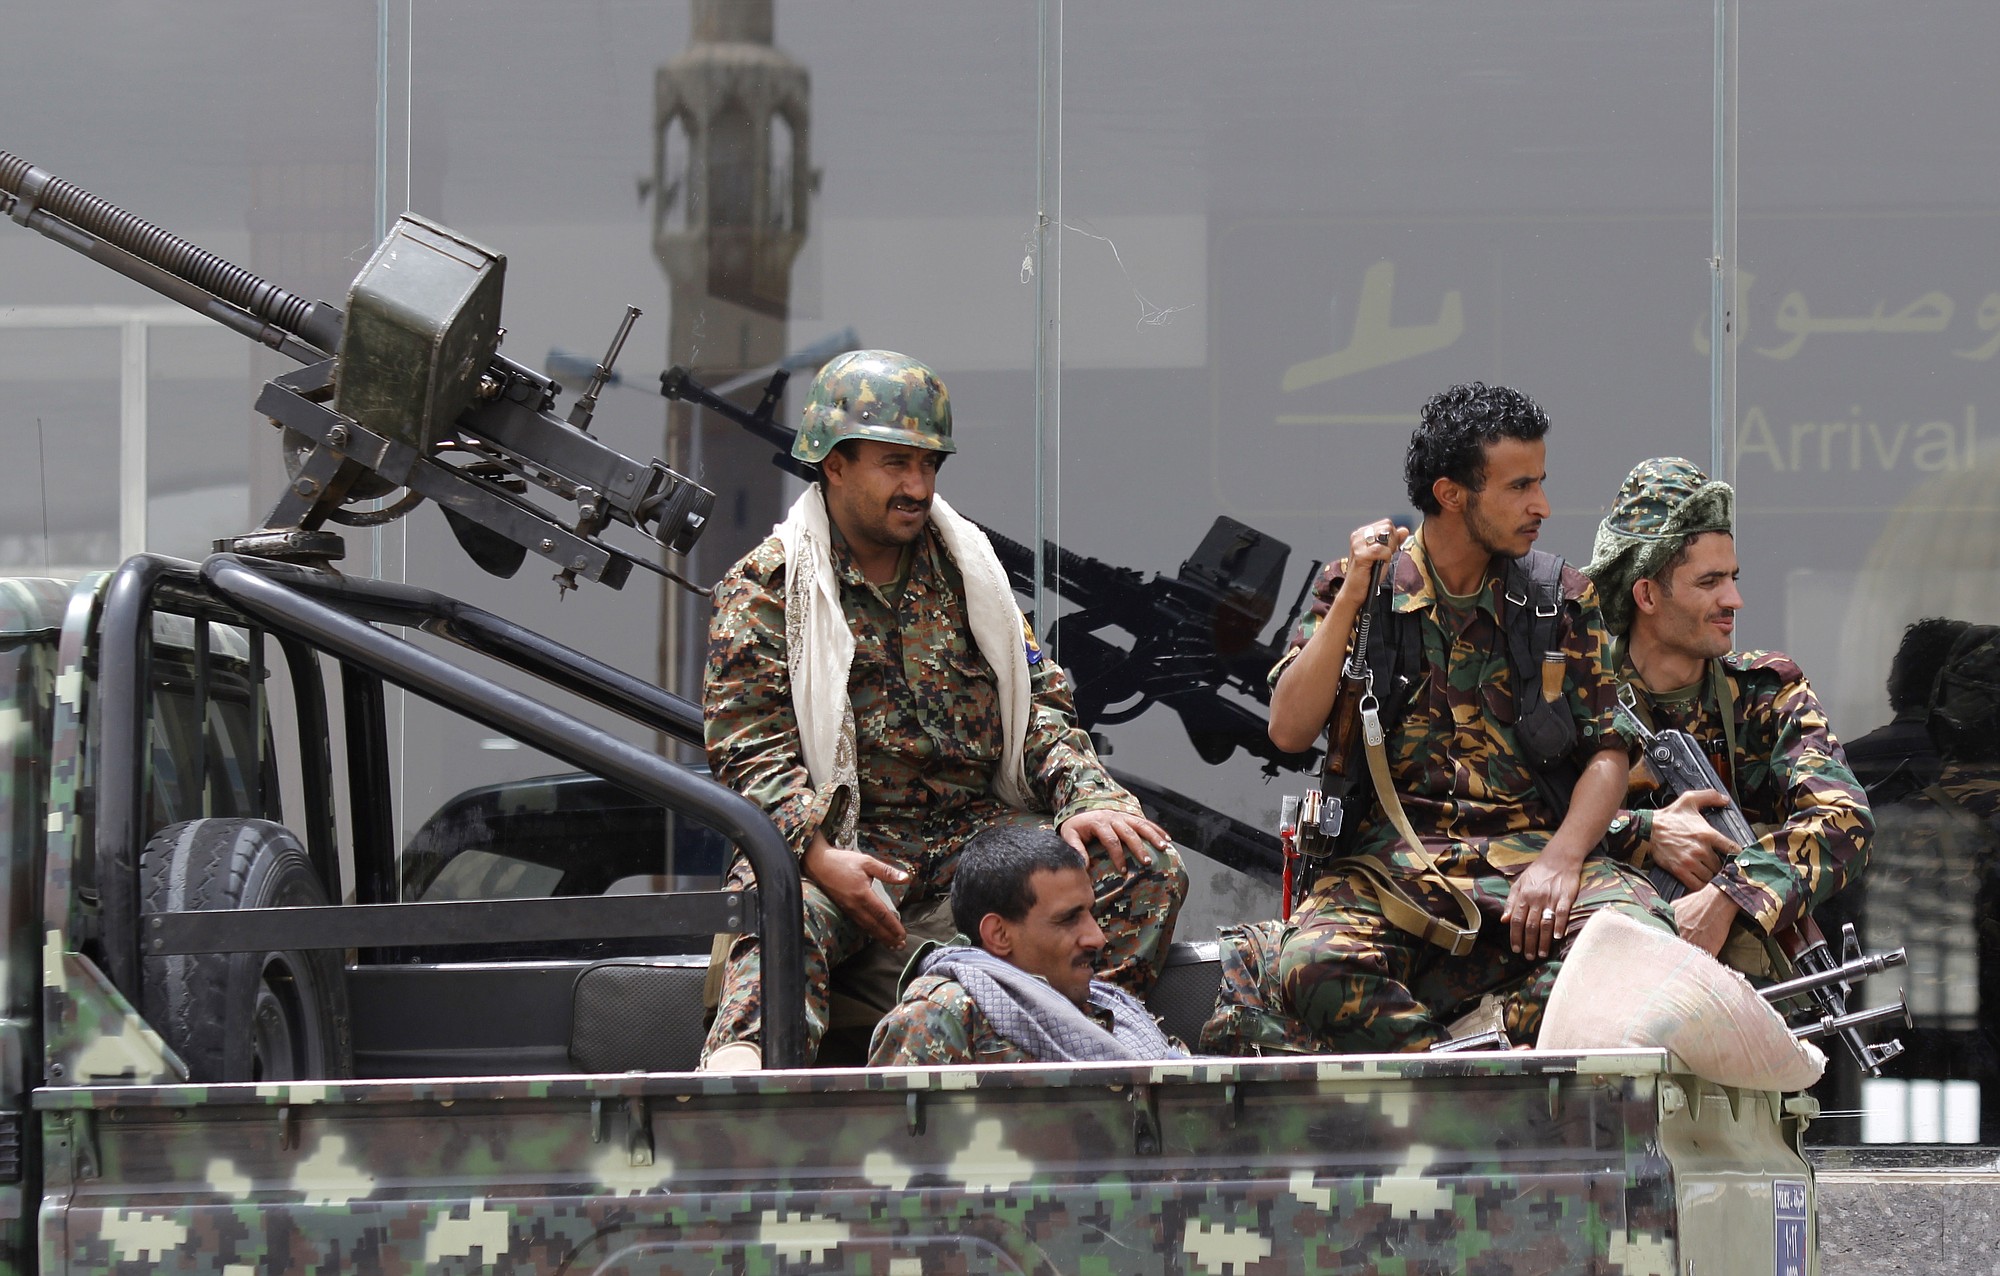 Shiite rebels, known as Houthis, wearing an army uniform, ride on an armed truck to patrol the international airport in Sanaa, Yemen, Saturday, March 28, 2015. Yemen's President Abed Raboo Mansour Hadi, speaking at an Arab summit in Egypt on Saturday, called Shiite rebels who forced him to flee the country &quot;puppets of Iran,&quot; directly blaming the Islamic Republic for the chaos there and demanding airstrikes against rebel positions continue until they surrender.